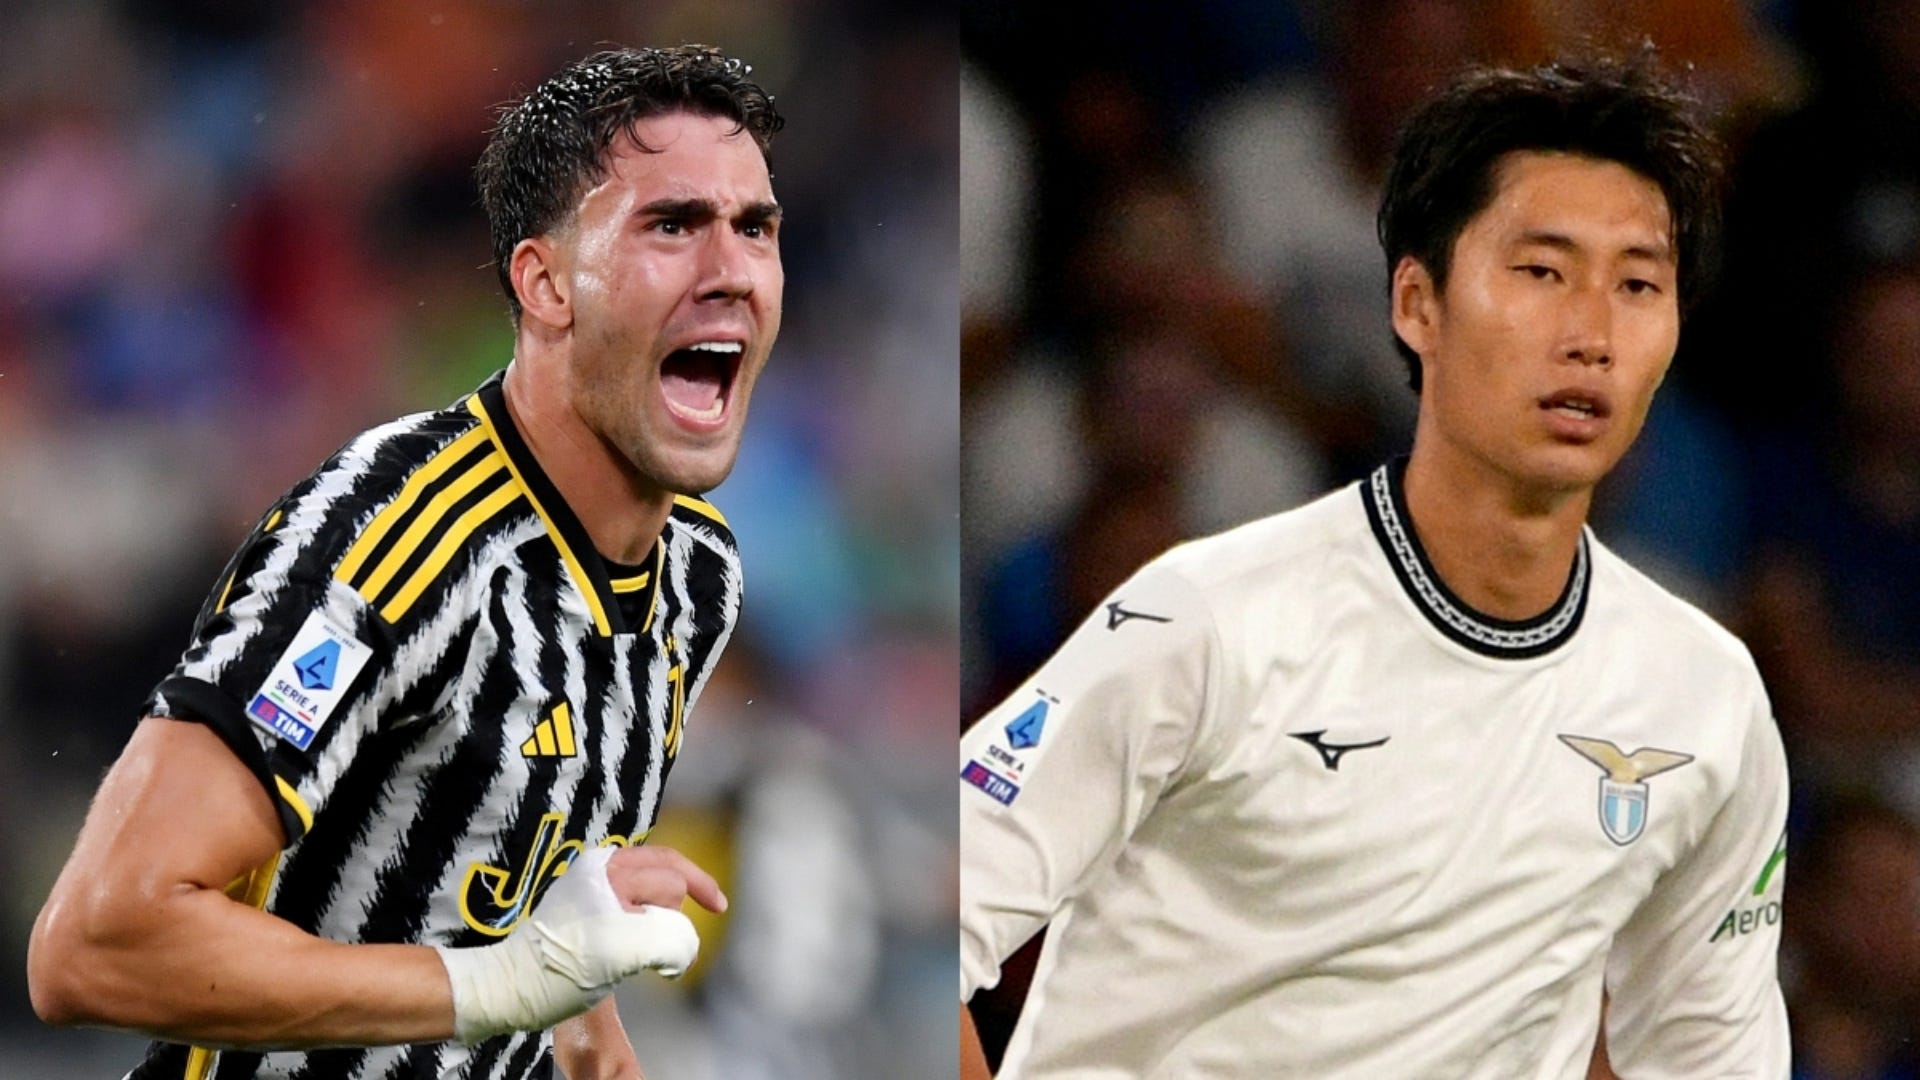 Juventus vs Lazio Live stream, TV channel, kick-off time and where to watch Goal UK